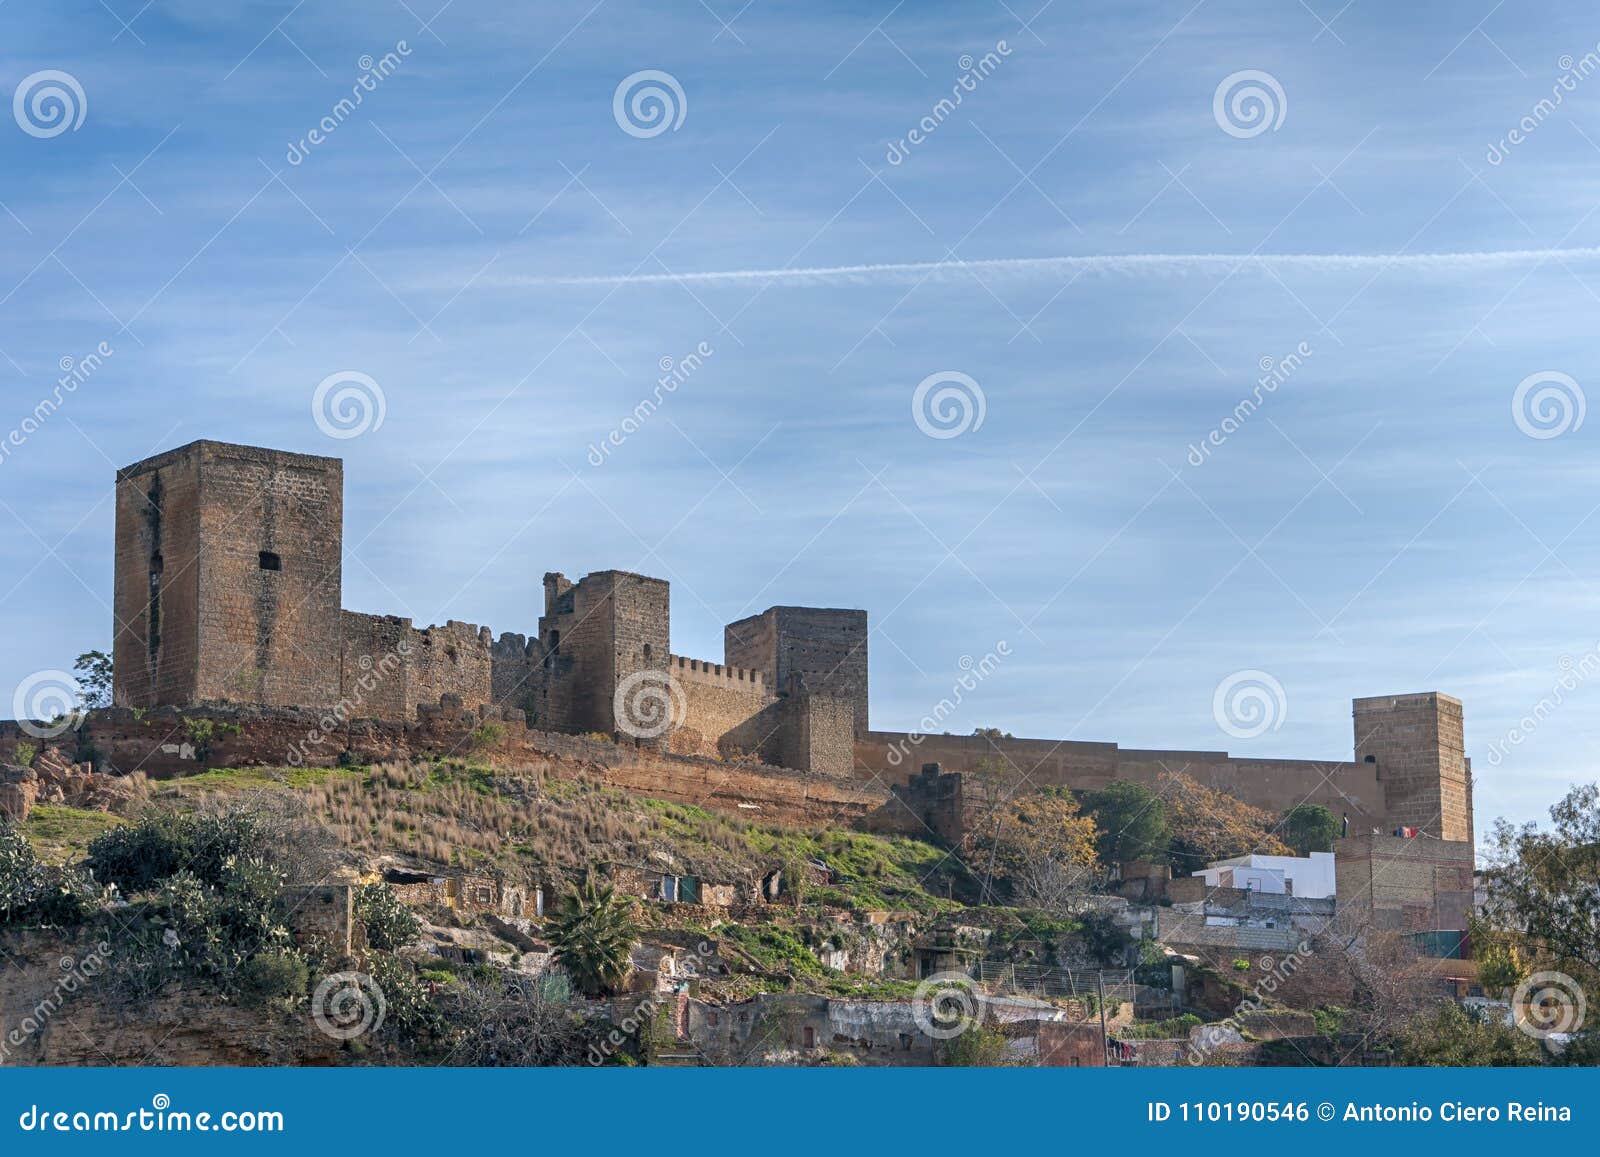 the castle of alcal de guadaira in the province of seville, andalusia